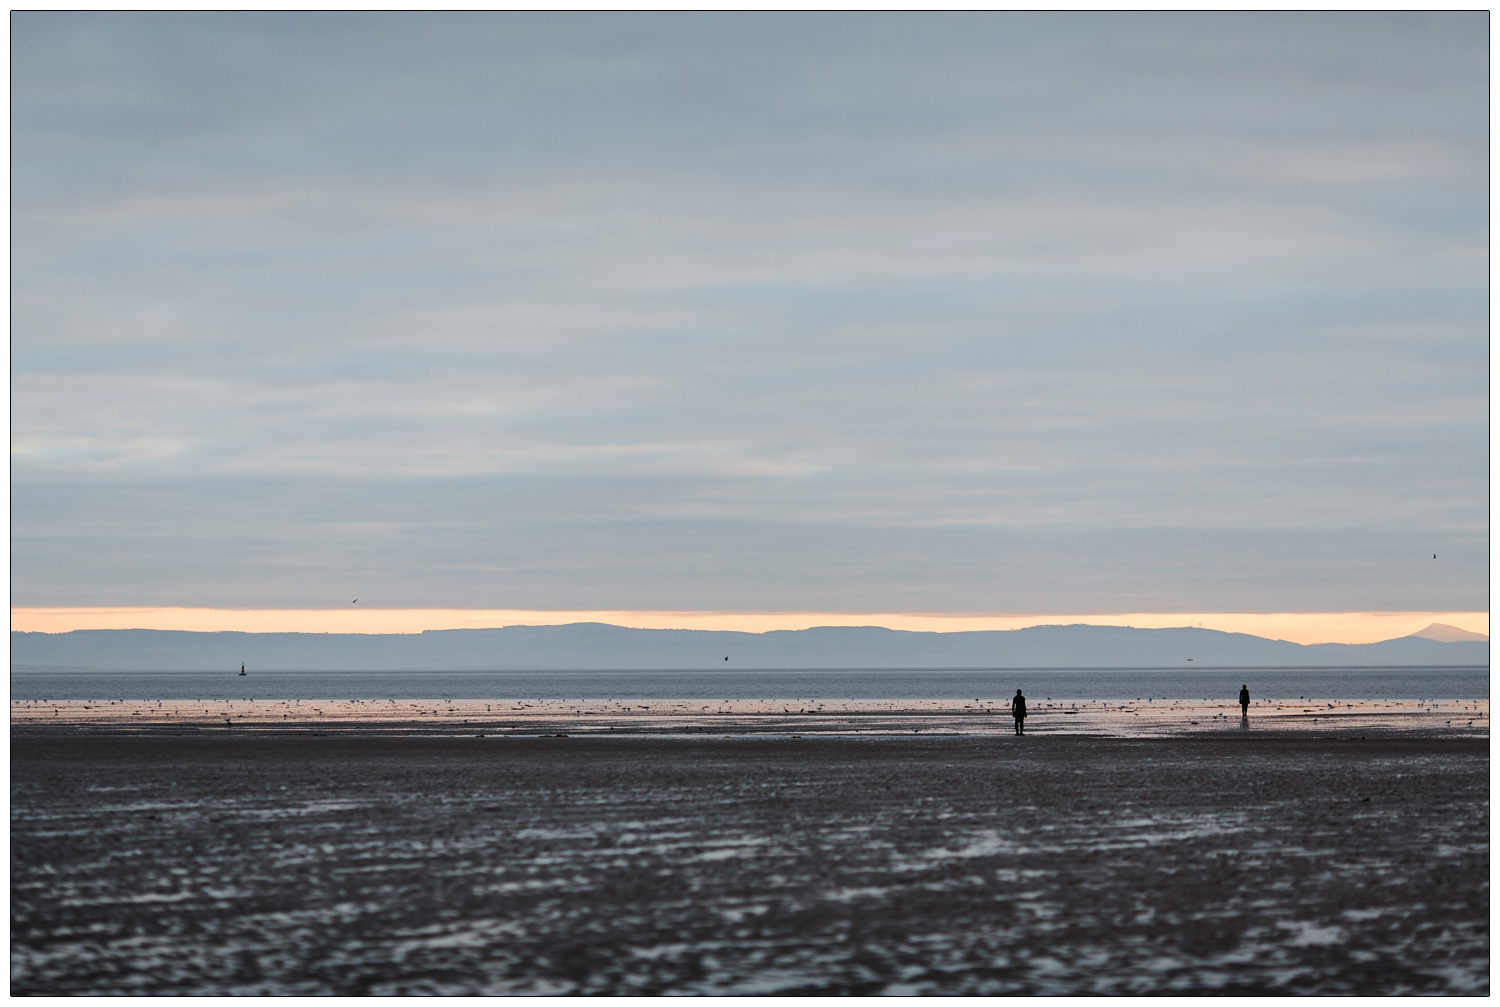 Antony Gormley Another Place sculptures on Crosby beach near Liverpool